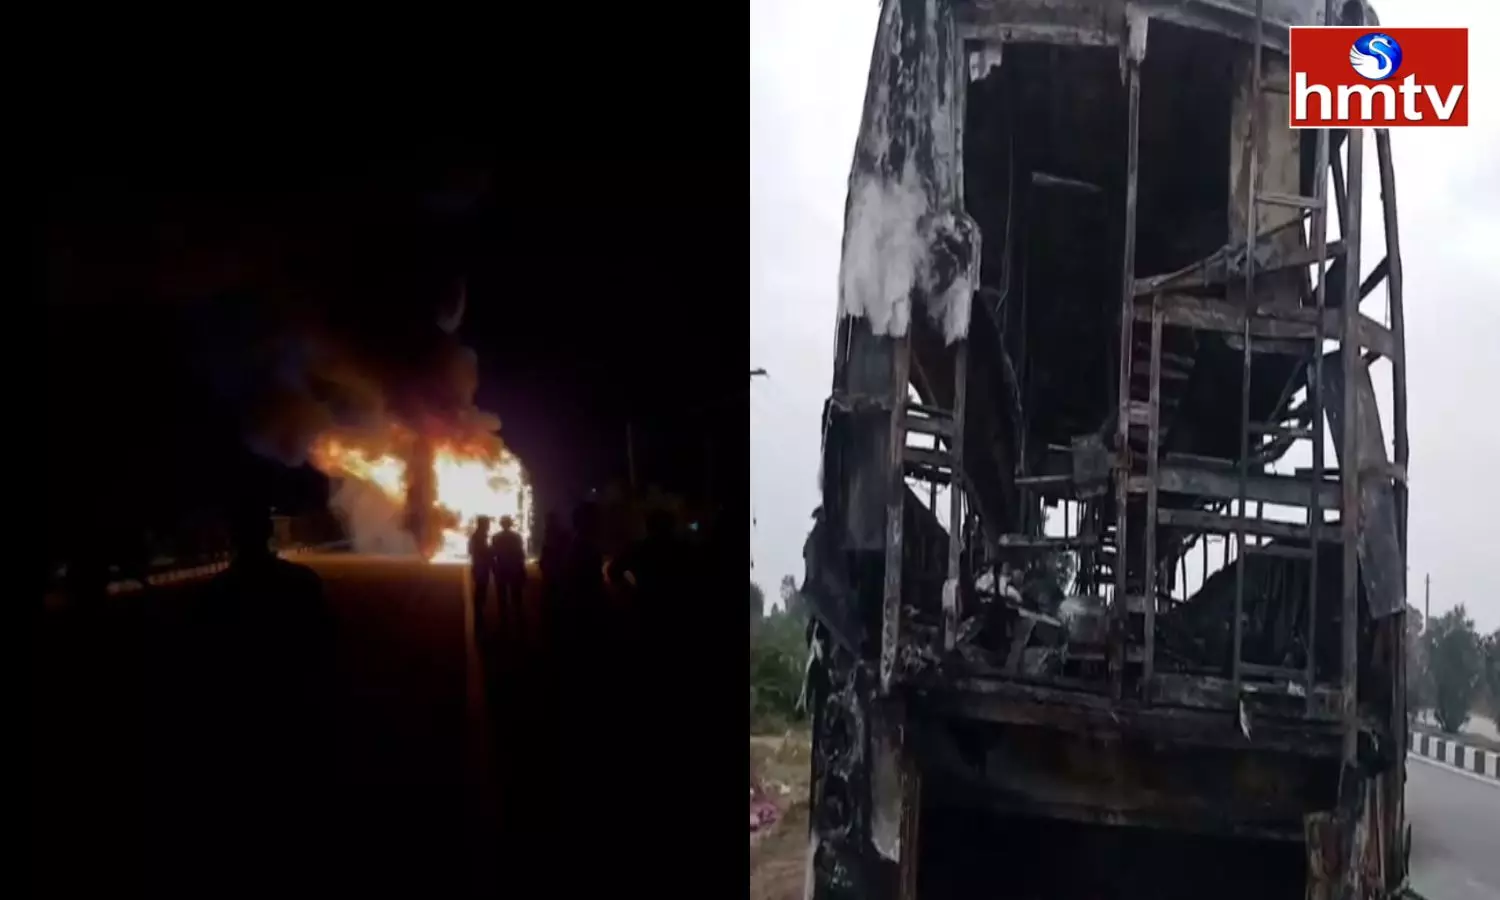 A Travel Bus Caught Fire at Marriguda in Nalgonda District